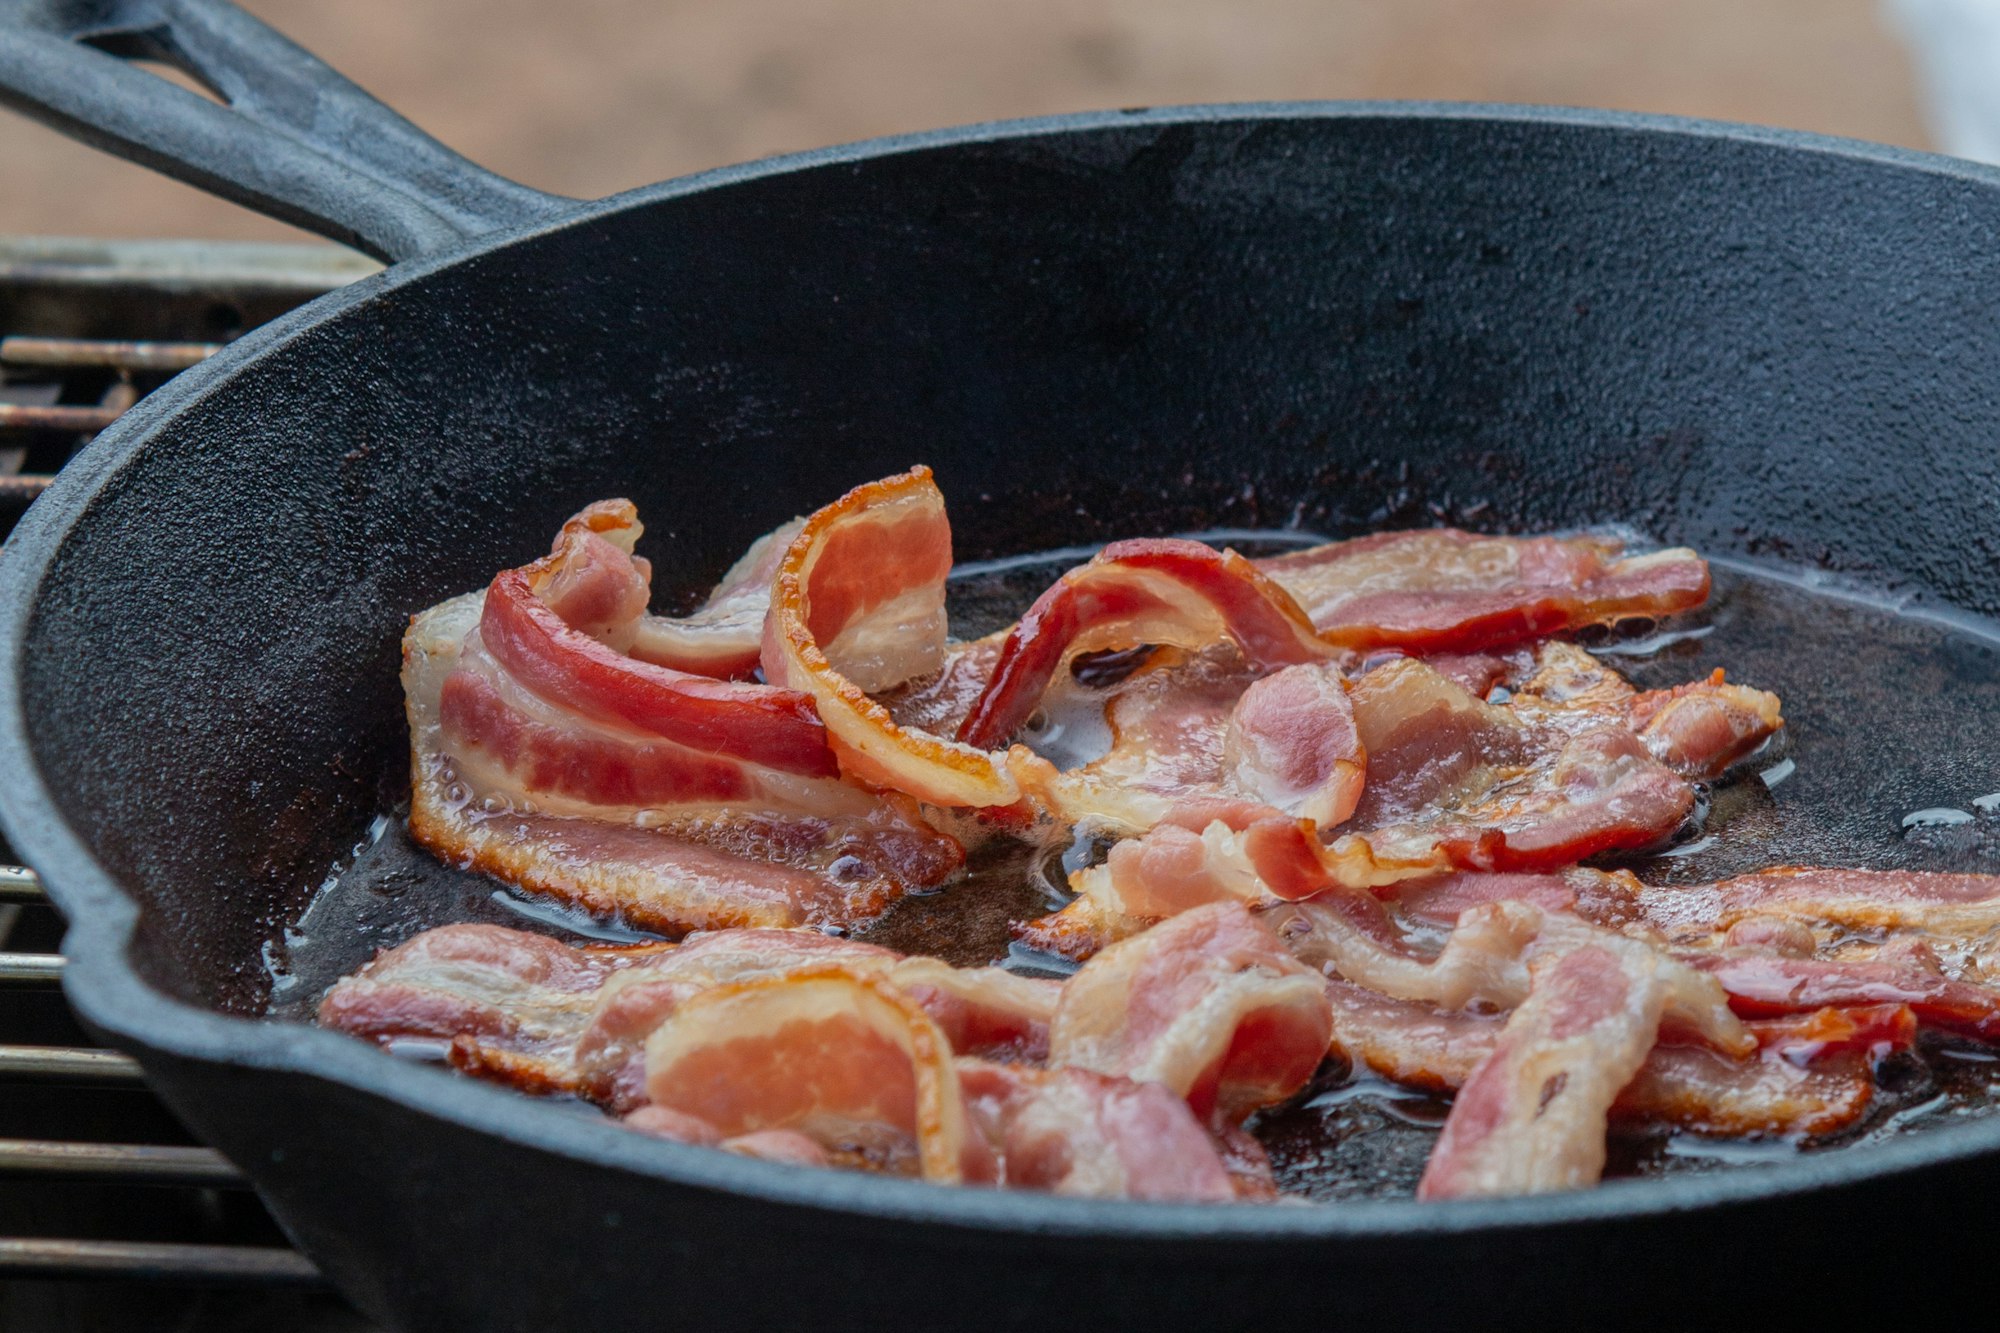 Bacon being cooked in a cast iron pan